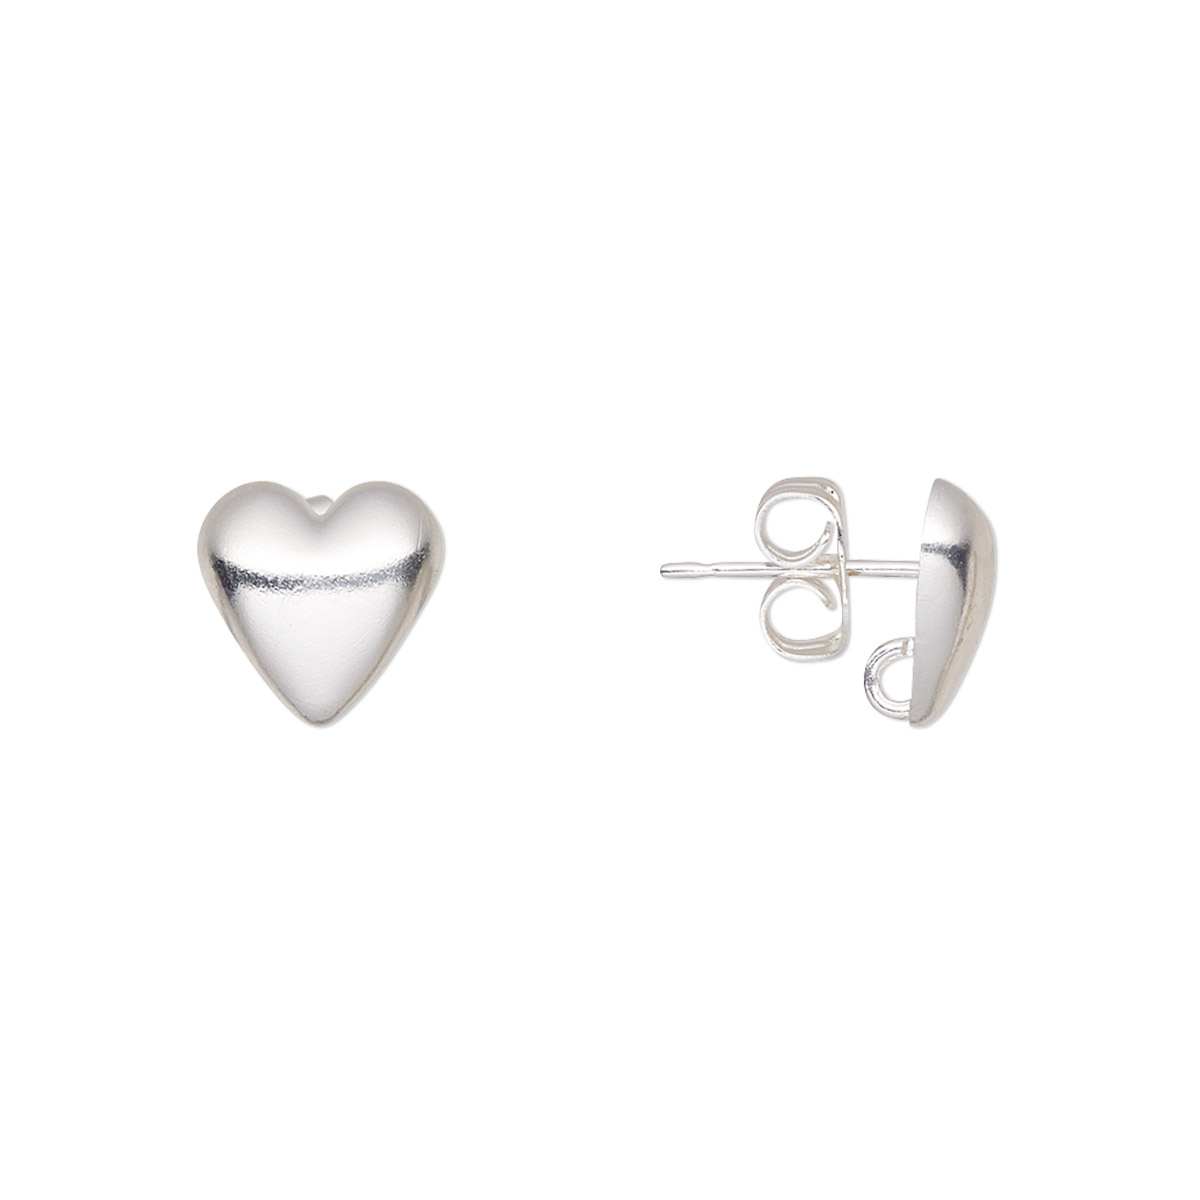 Earstud, silver-plated brass, 9mm half-dome heart with open loop. Sold ...